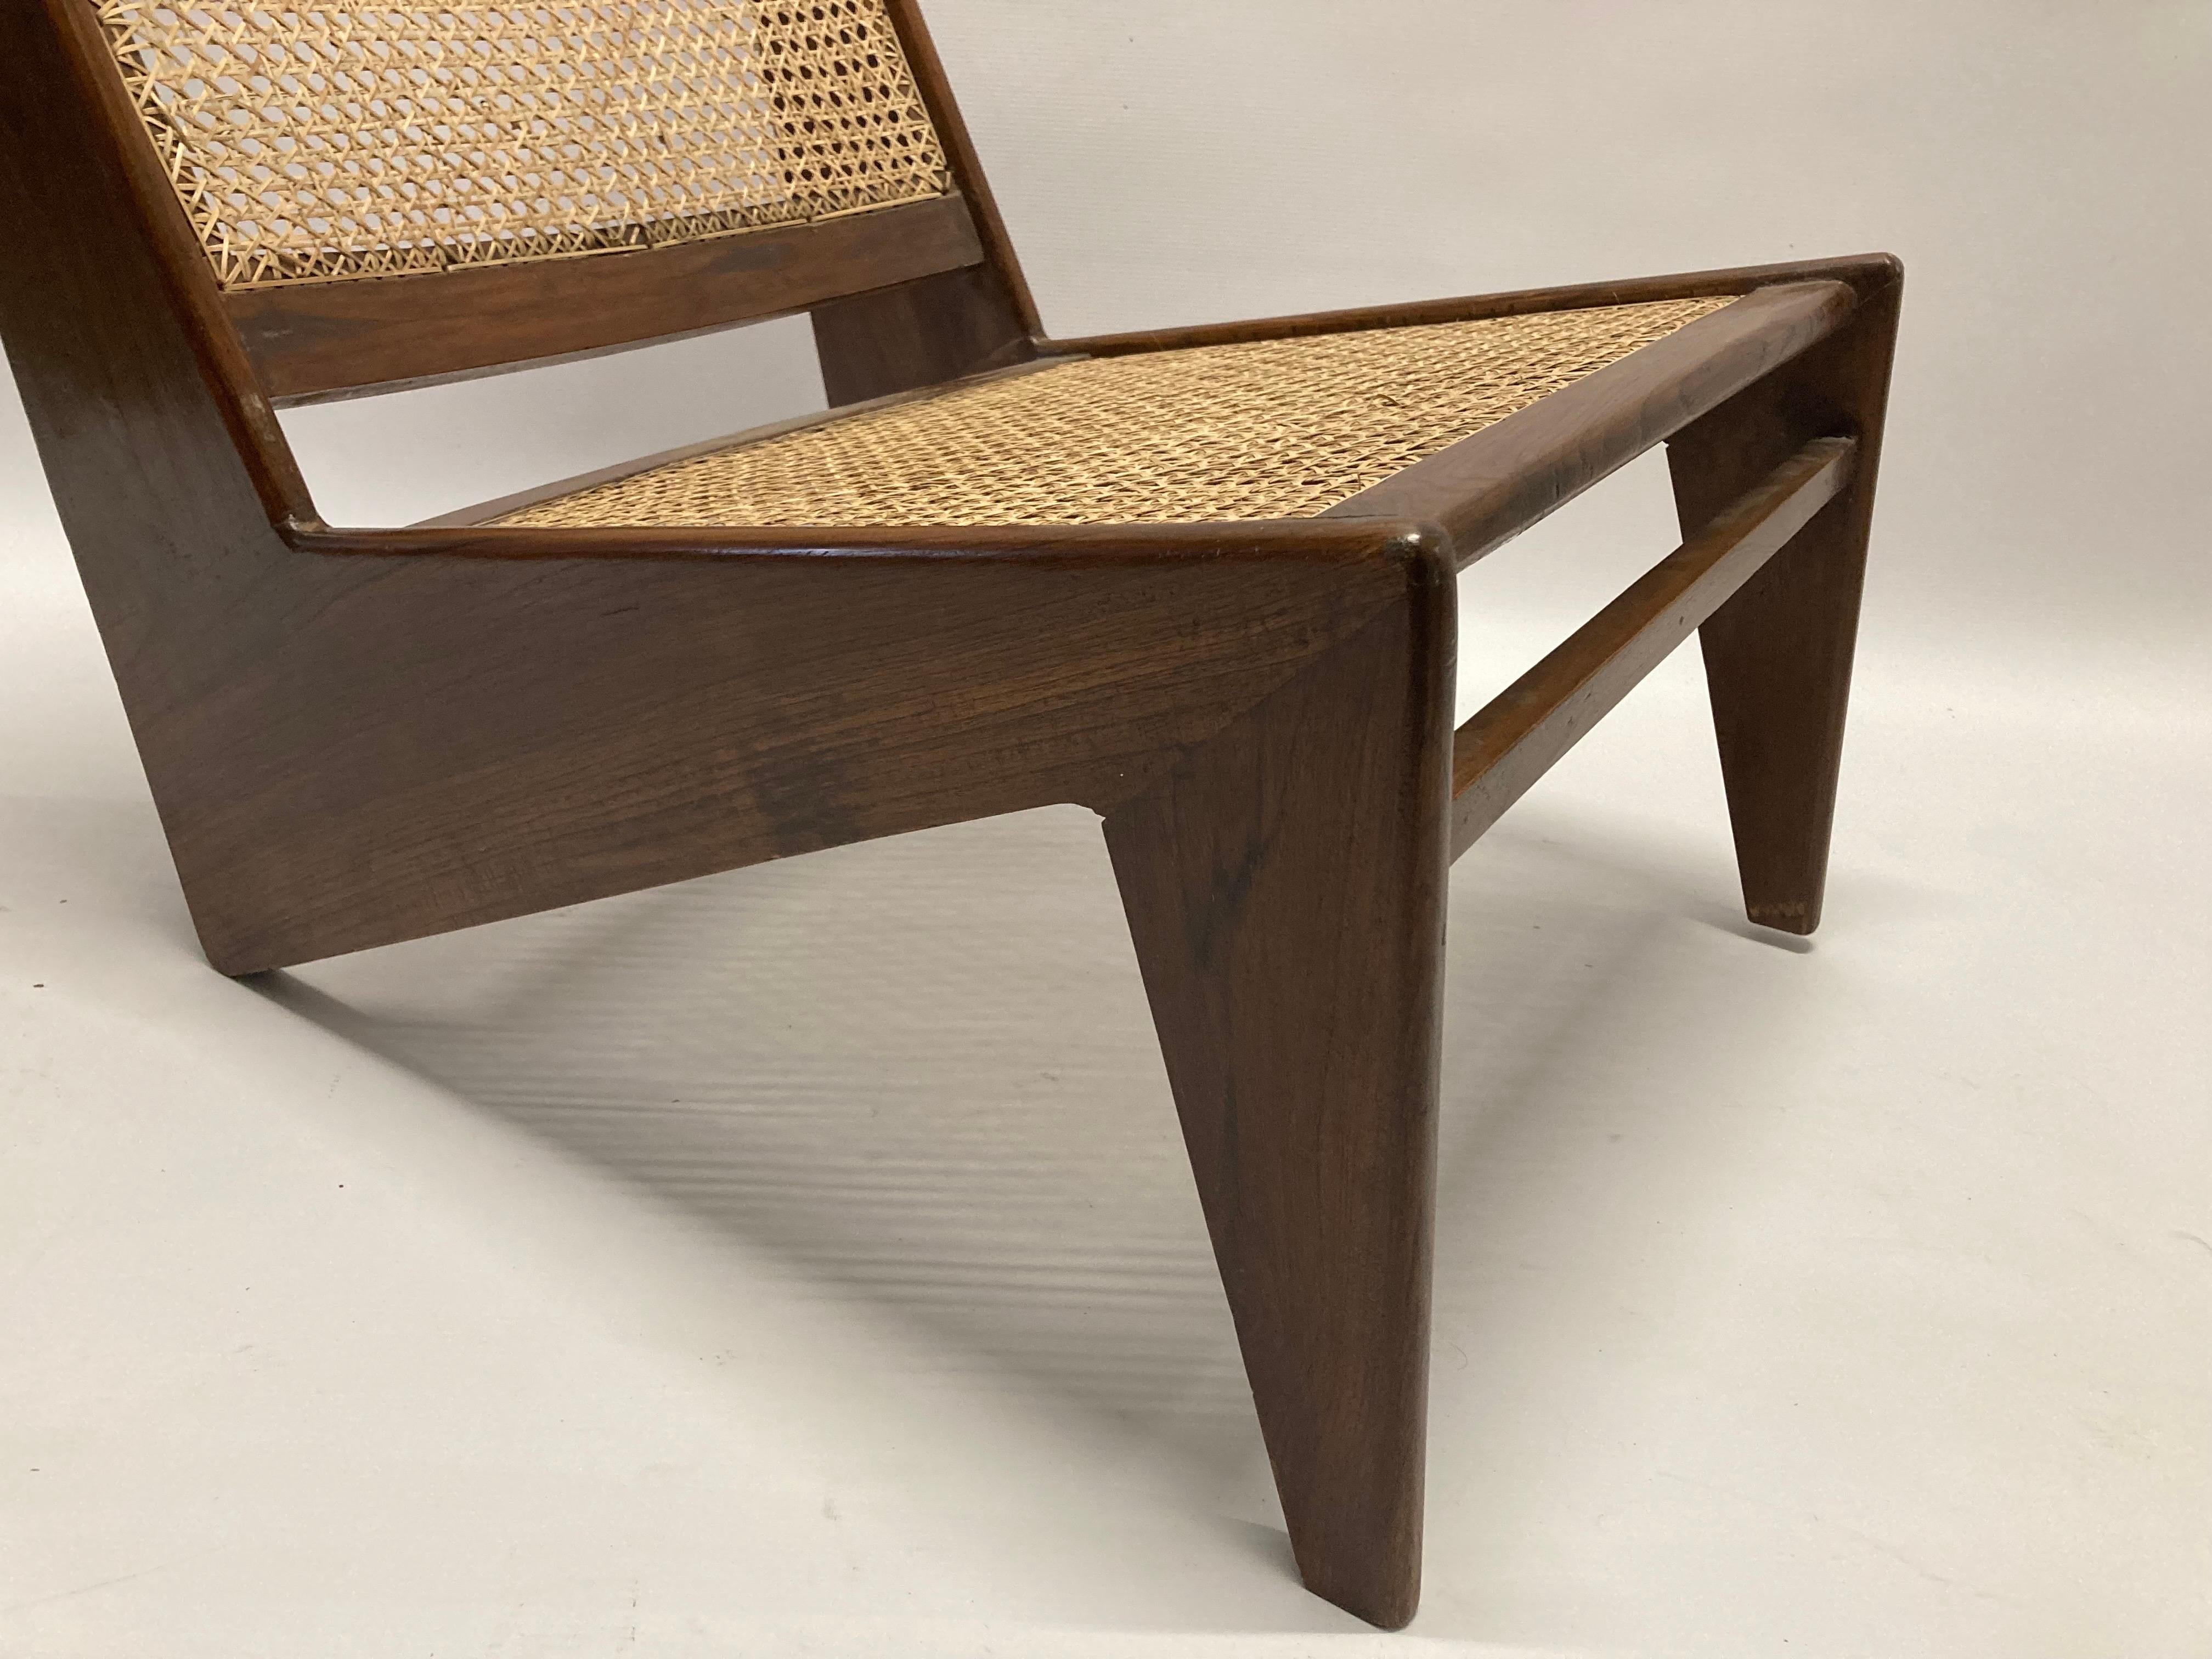 1950s Pierre Jeanneret 'Kangourou' Chandigarh Lounge Chair PJ-SI-59-A For Sale 5